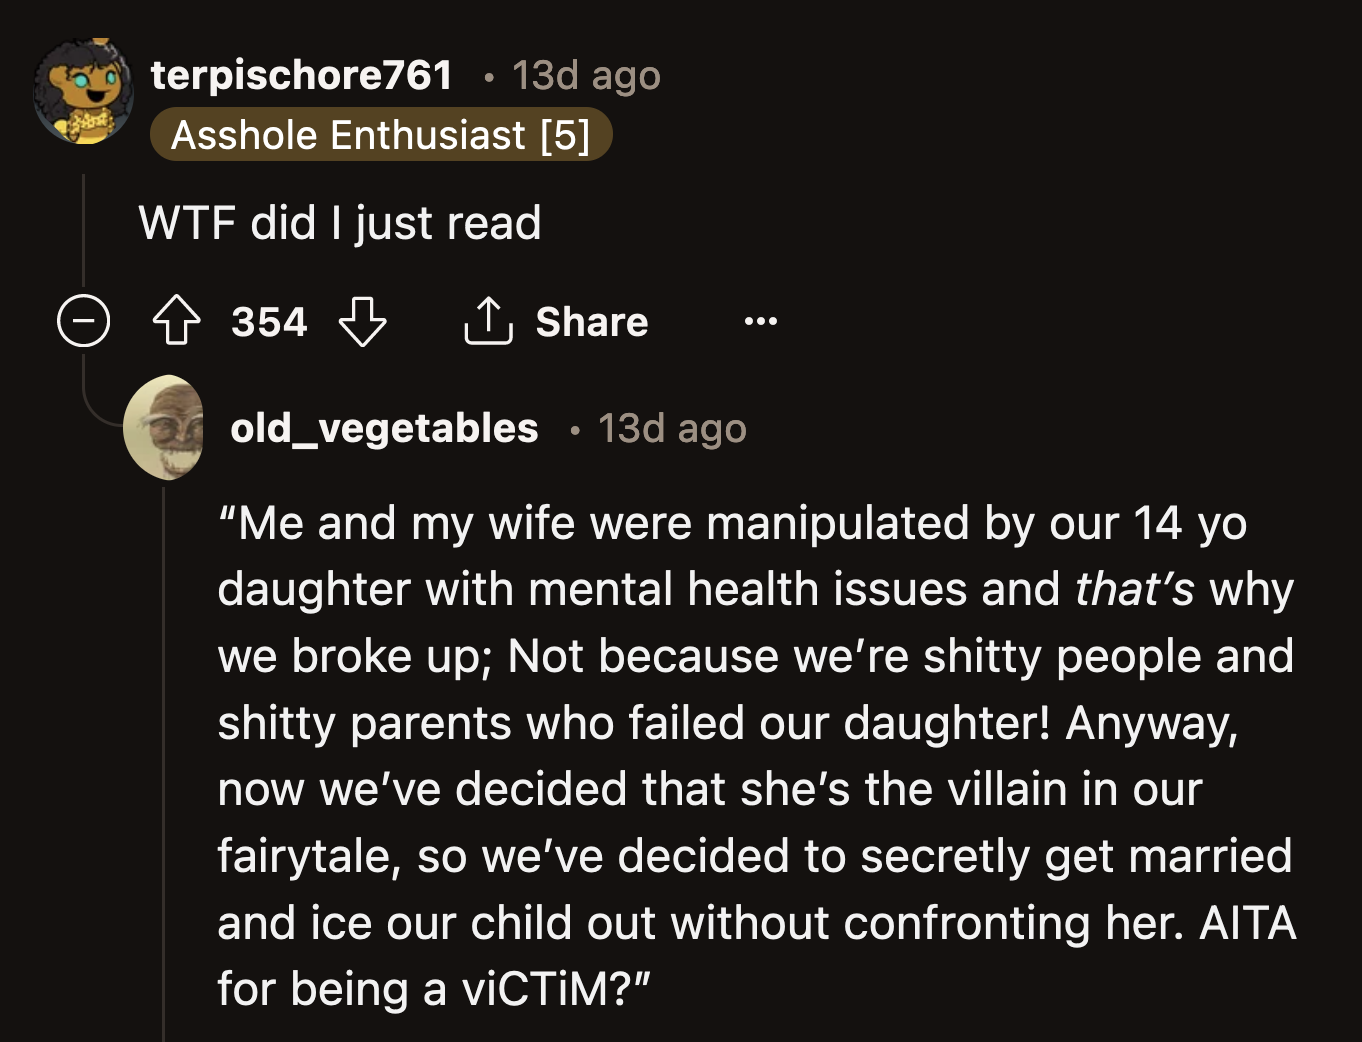 Too many Redditors write misleading titles to get sympathy. They look like clowns when the story reveals how evil they are.